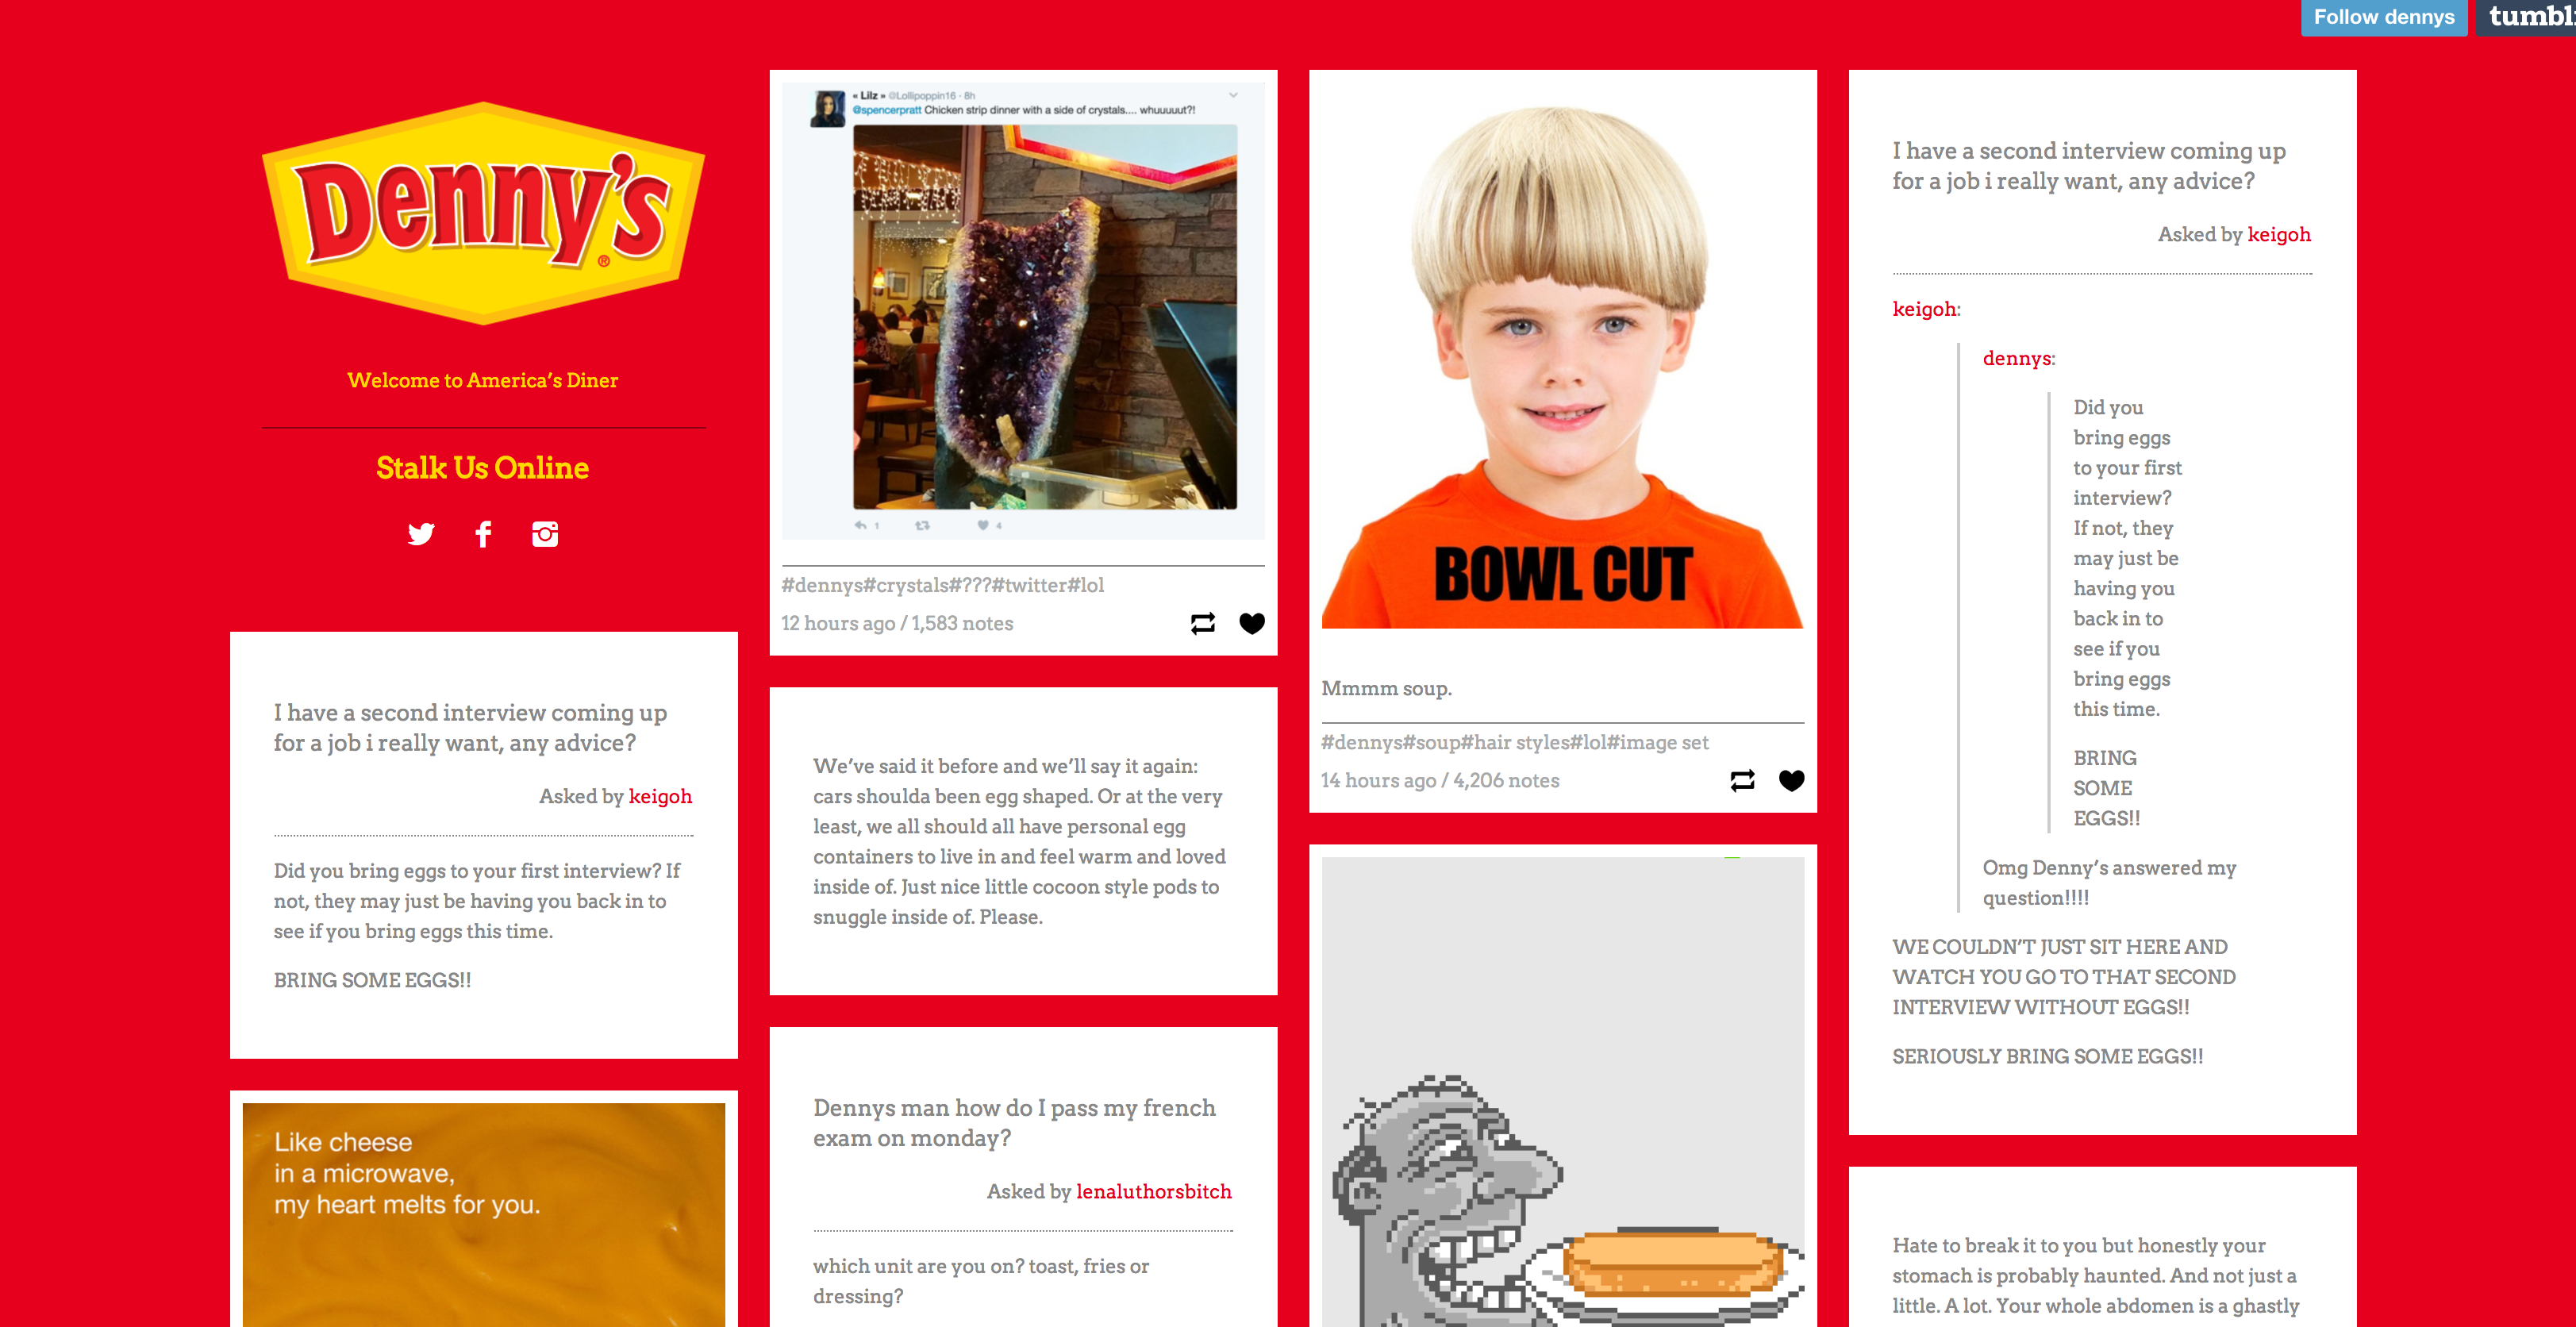 content marketing agency denny's